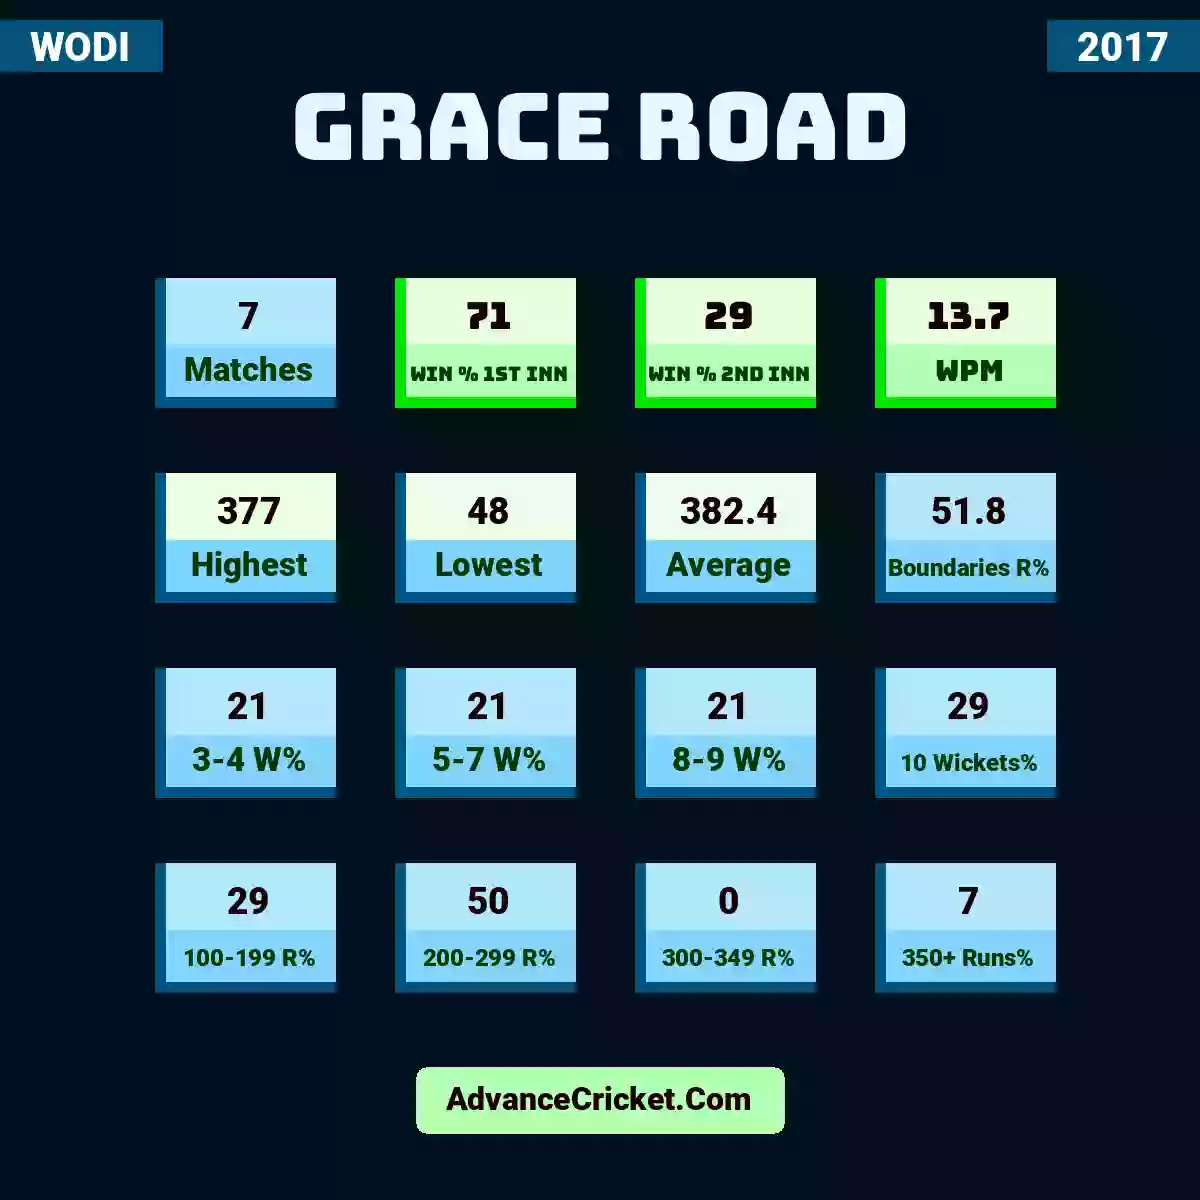 Image showing Grace Road with Matches: 7, Win % 1st Inn: 71, Win % 2nd Inn: 29, WPM: 13.7, Highest: 377, Lowest: 48, Average: 382.4, Boundaries R%: 51.8, 3-4 W%: 21, 5-7 W%: 21, 8-9 W%: 21, 10 Wickets%: 29, 100-199 R%: 29, 200-299 R%: 50, 300-349 R%: 0, 350+ Runs%: 7.